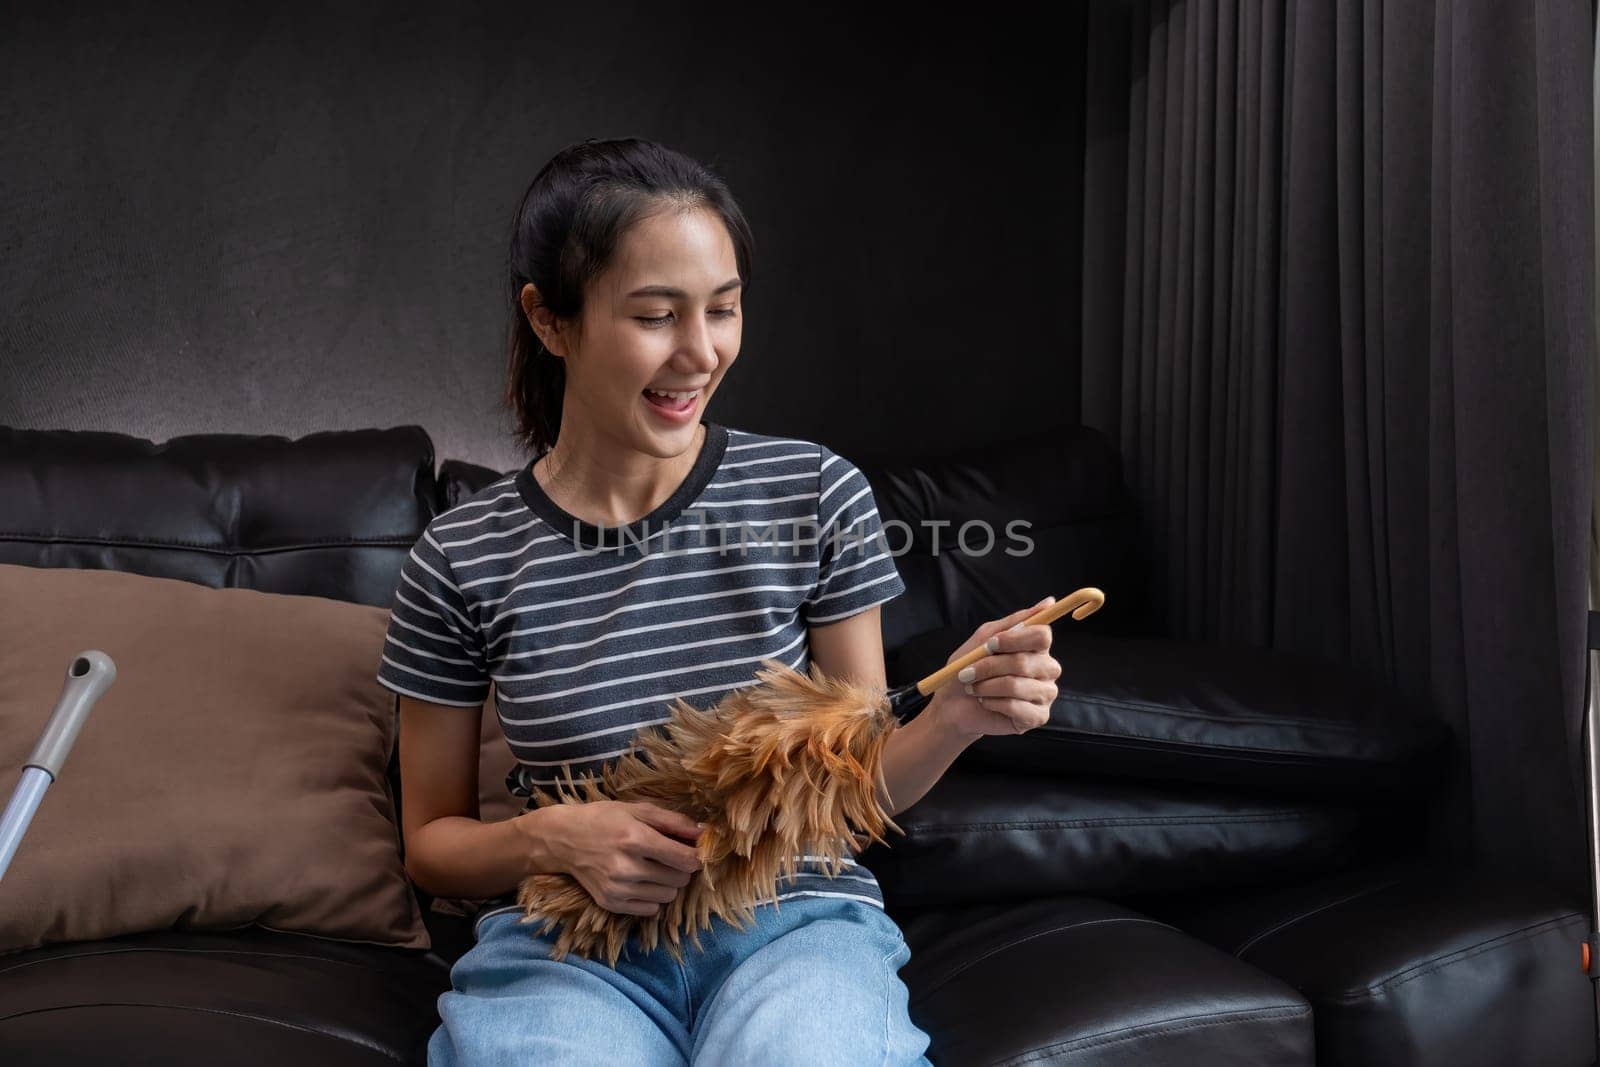 Smiling woman holding feather duster in living room. Concept of household chores and cleanliness.